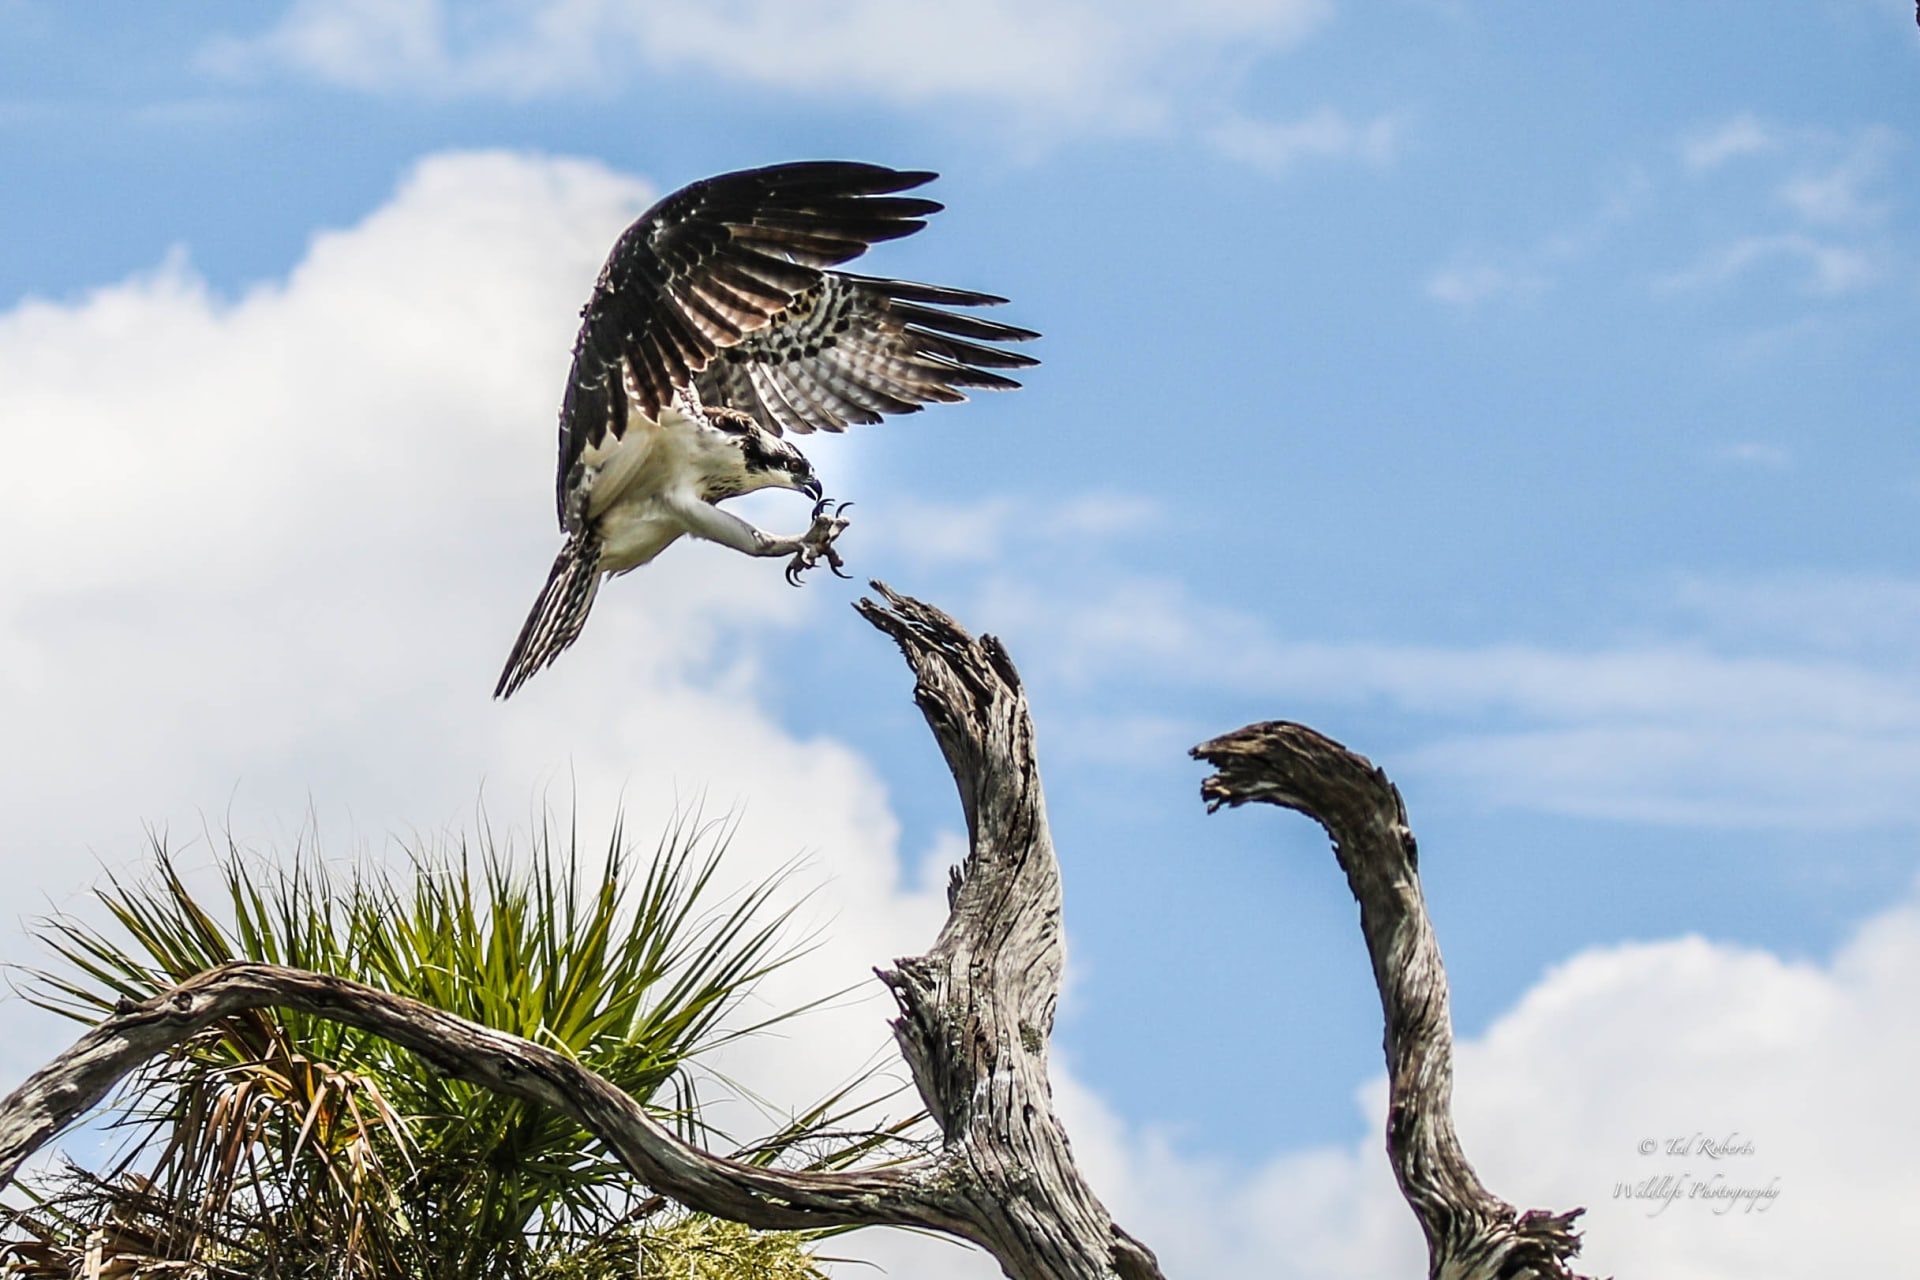 An American documents the painful moment of a bird snatching a baby crocodile from its mother